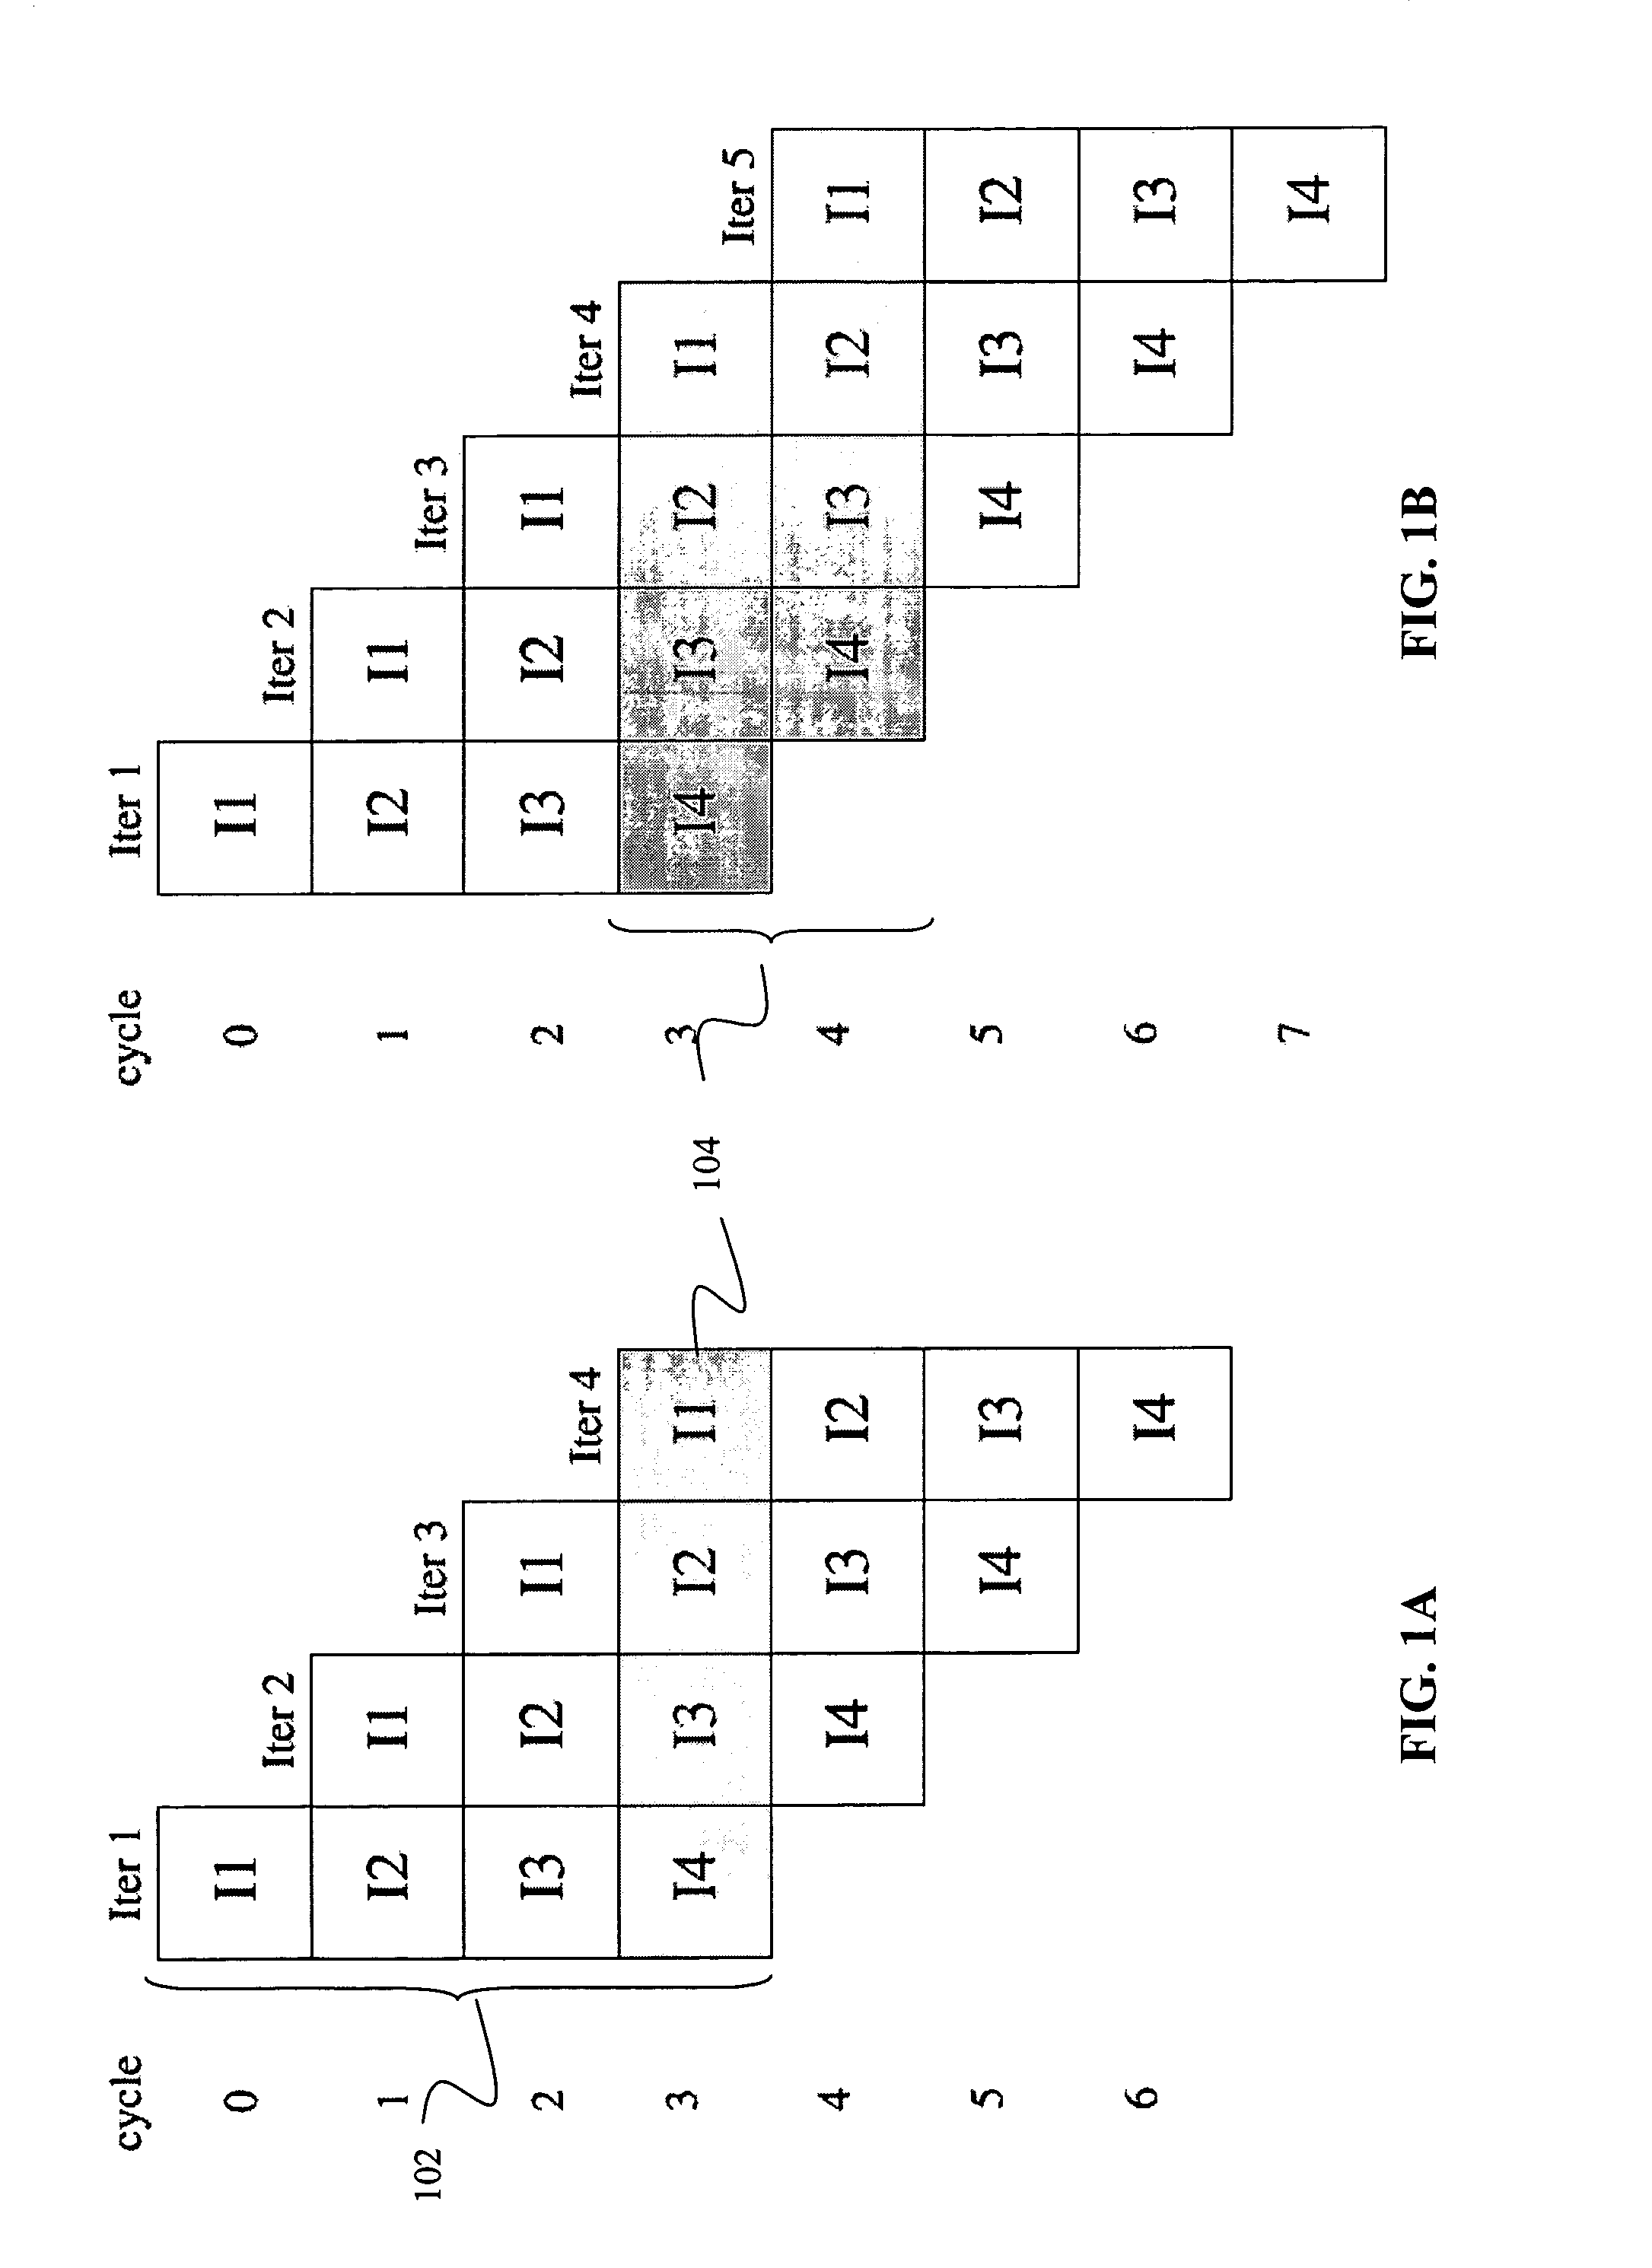 Method and apparatus for modulo scheduled loop execution in a processor architecture